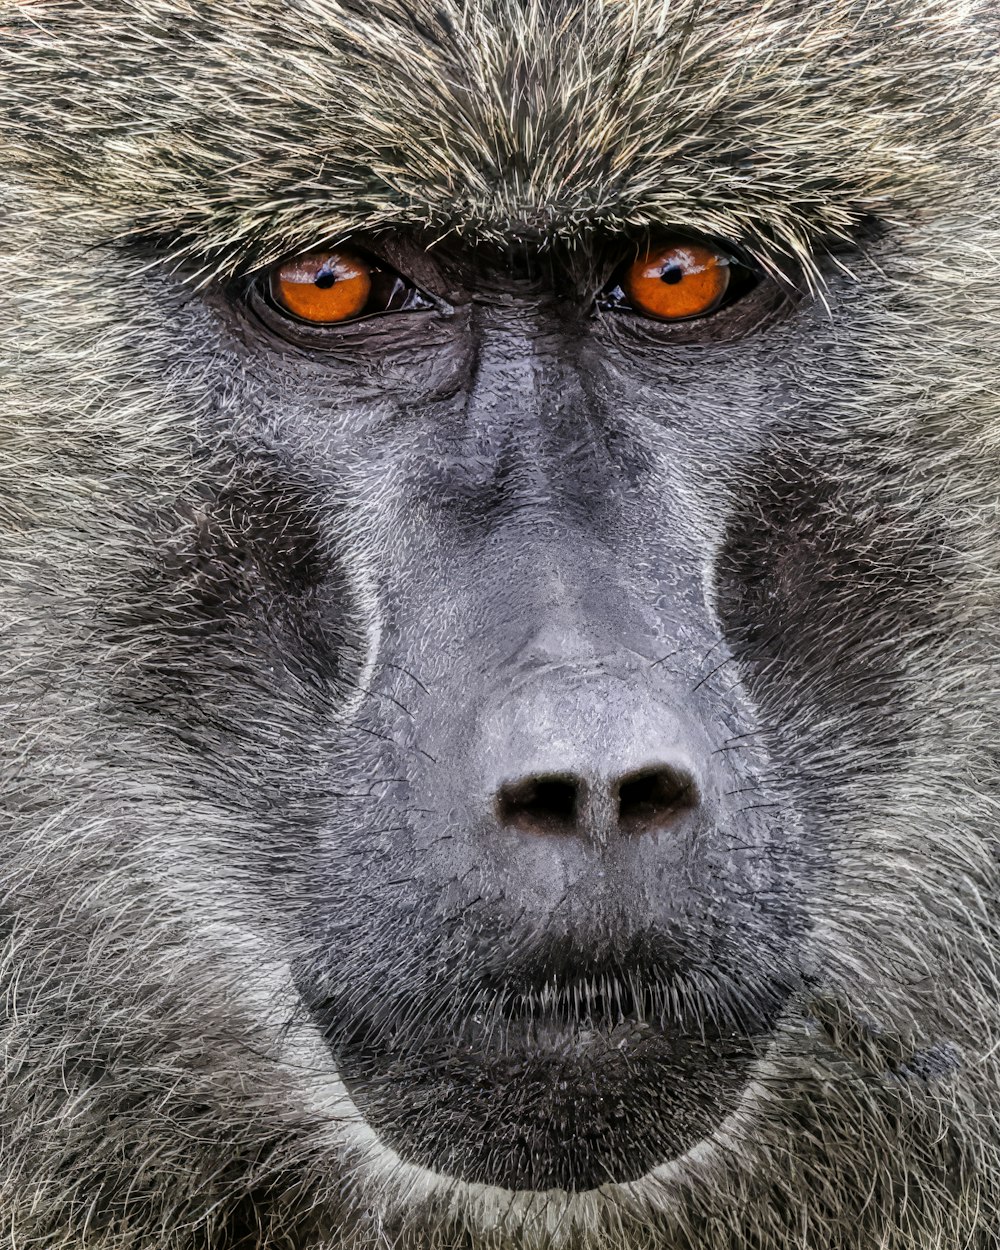 a close up of a monkey with orange eyes